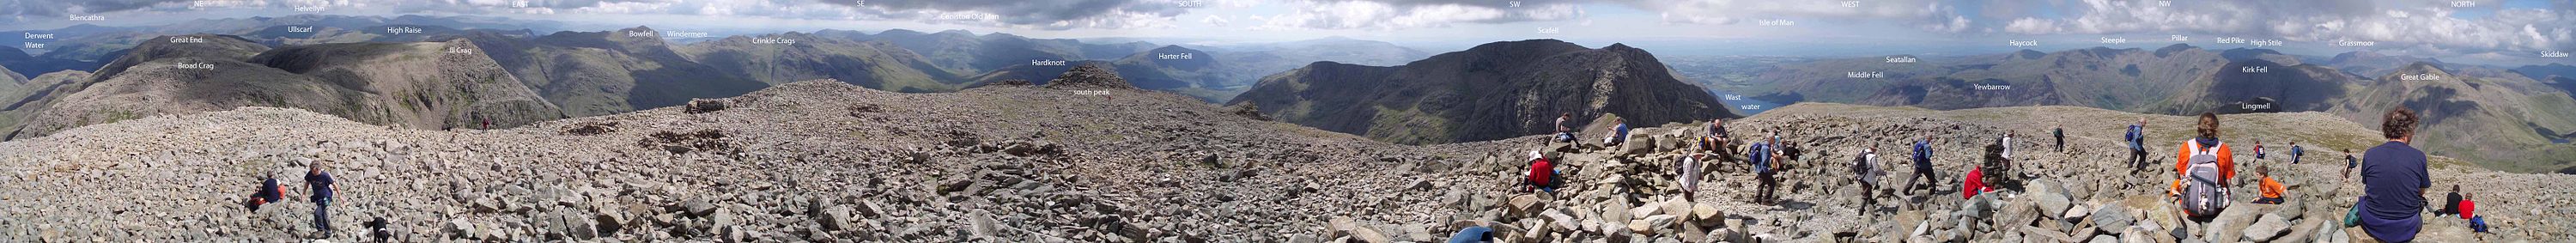 Panorama dhyworth topp Scafell Pike, mis Est 2007